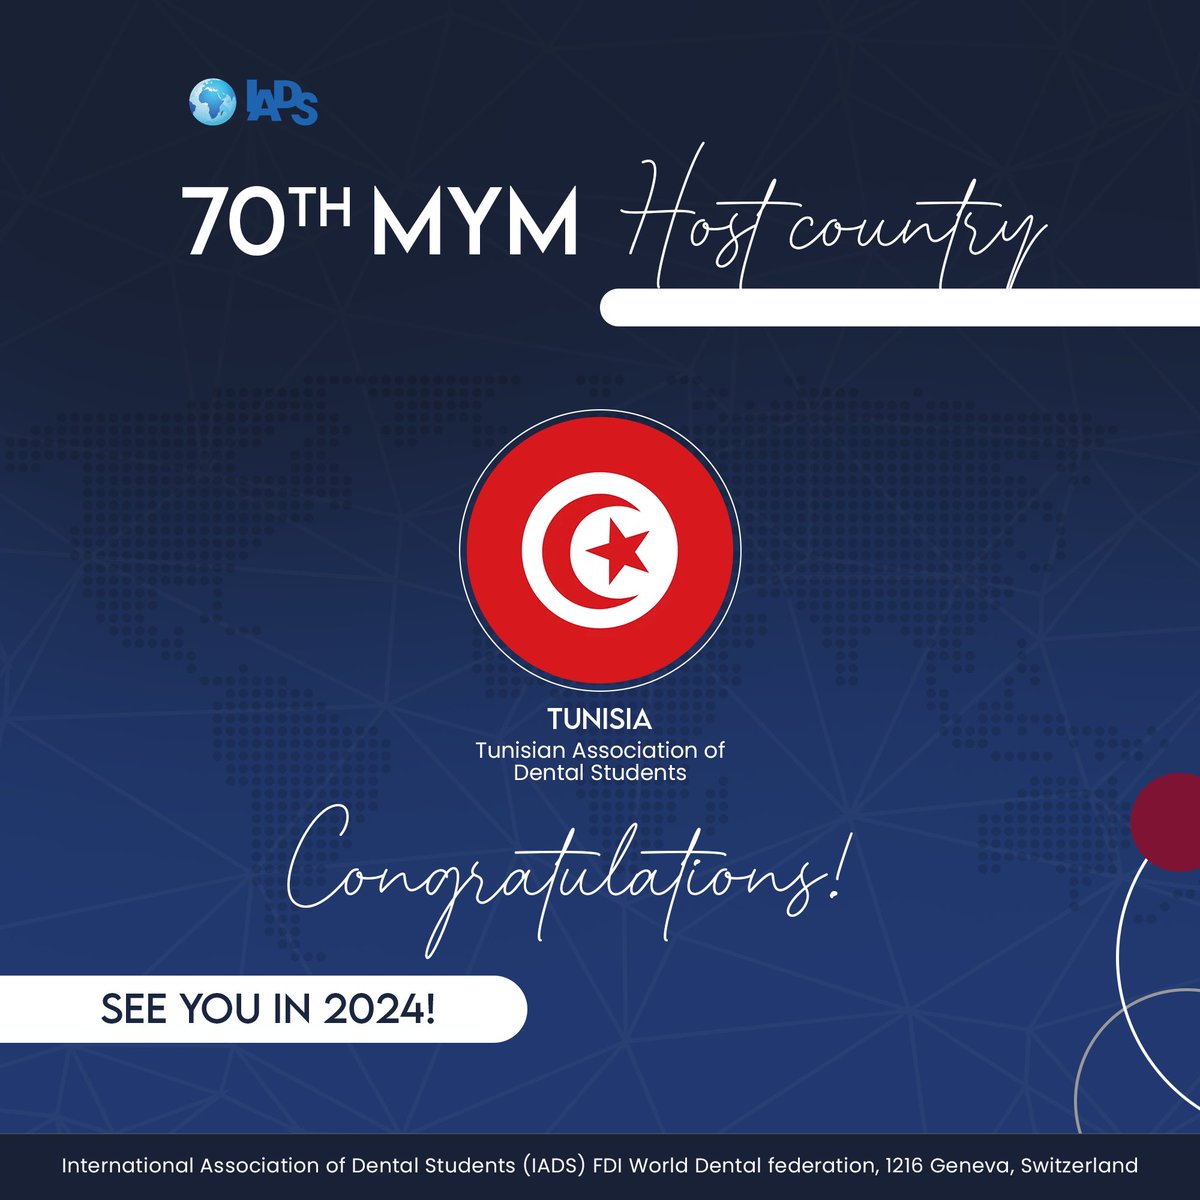 Congratulations to Tunisian Association of Dental Students to be chosen as a host country for the 70th MidYear Meeting in 2024! See you there!